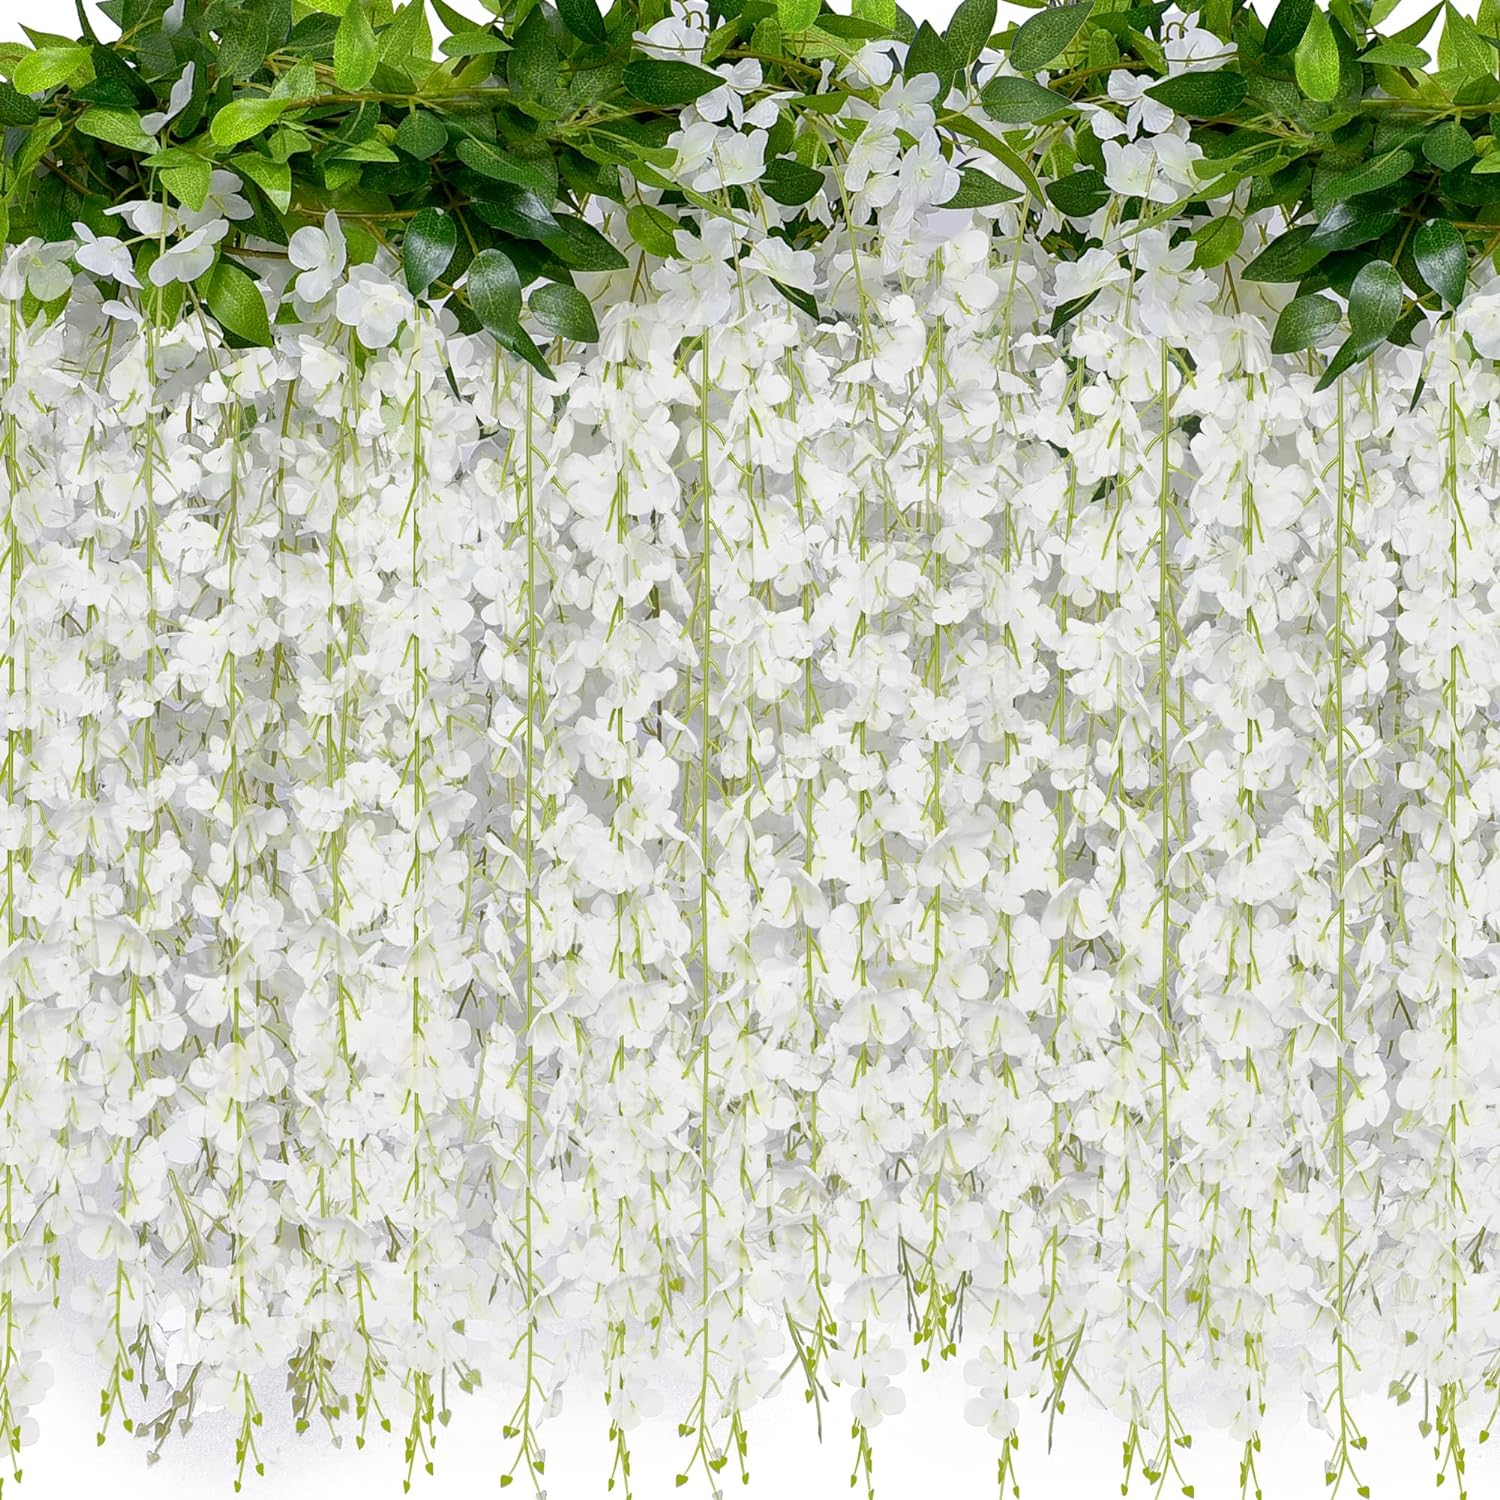 10x4 Branches Wisteria Hanging Flowers 6 Feet Artificial